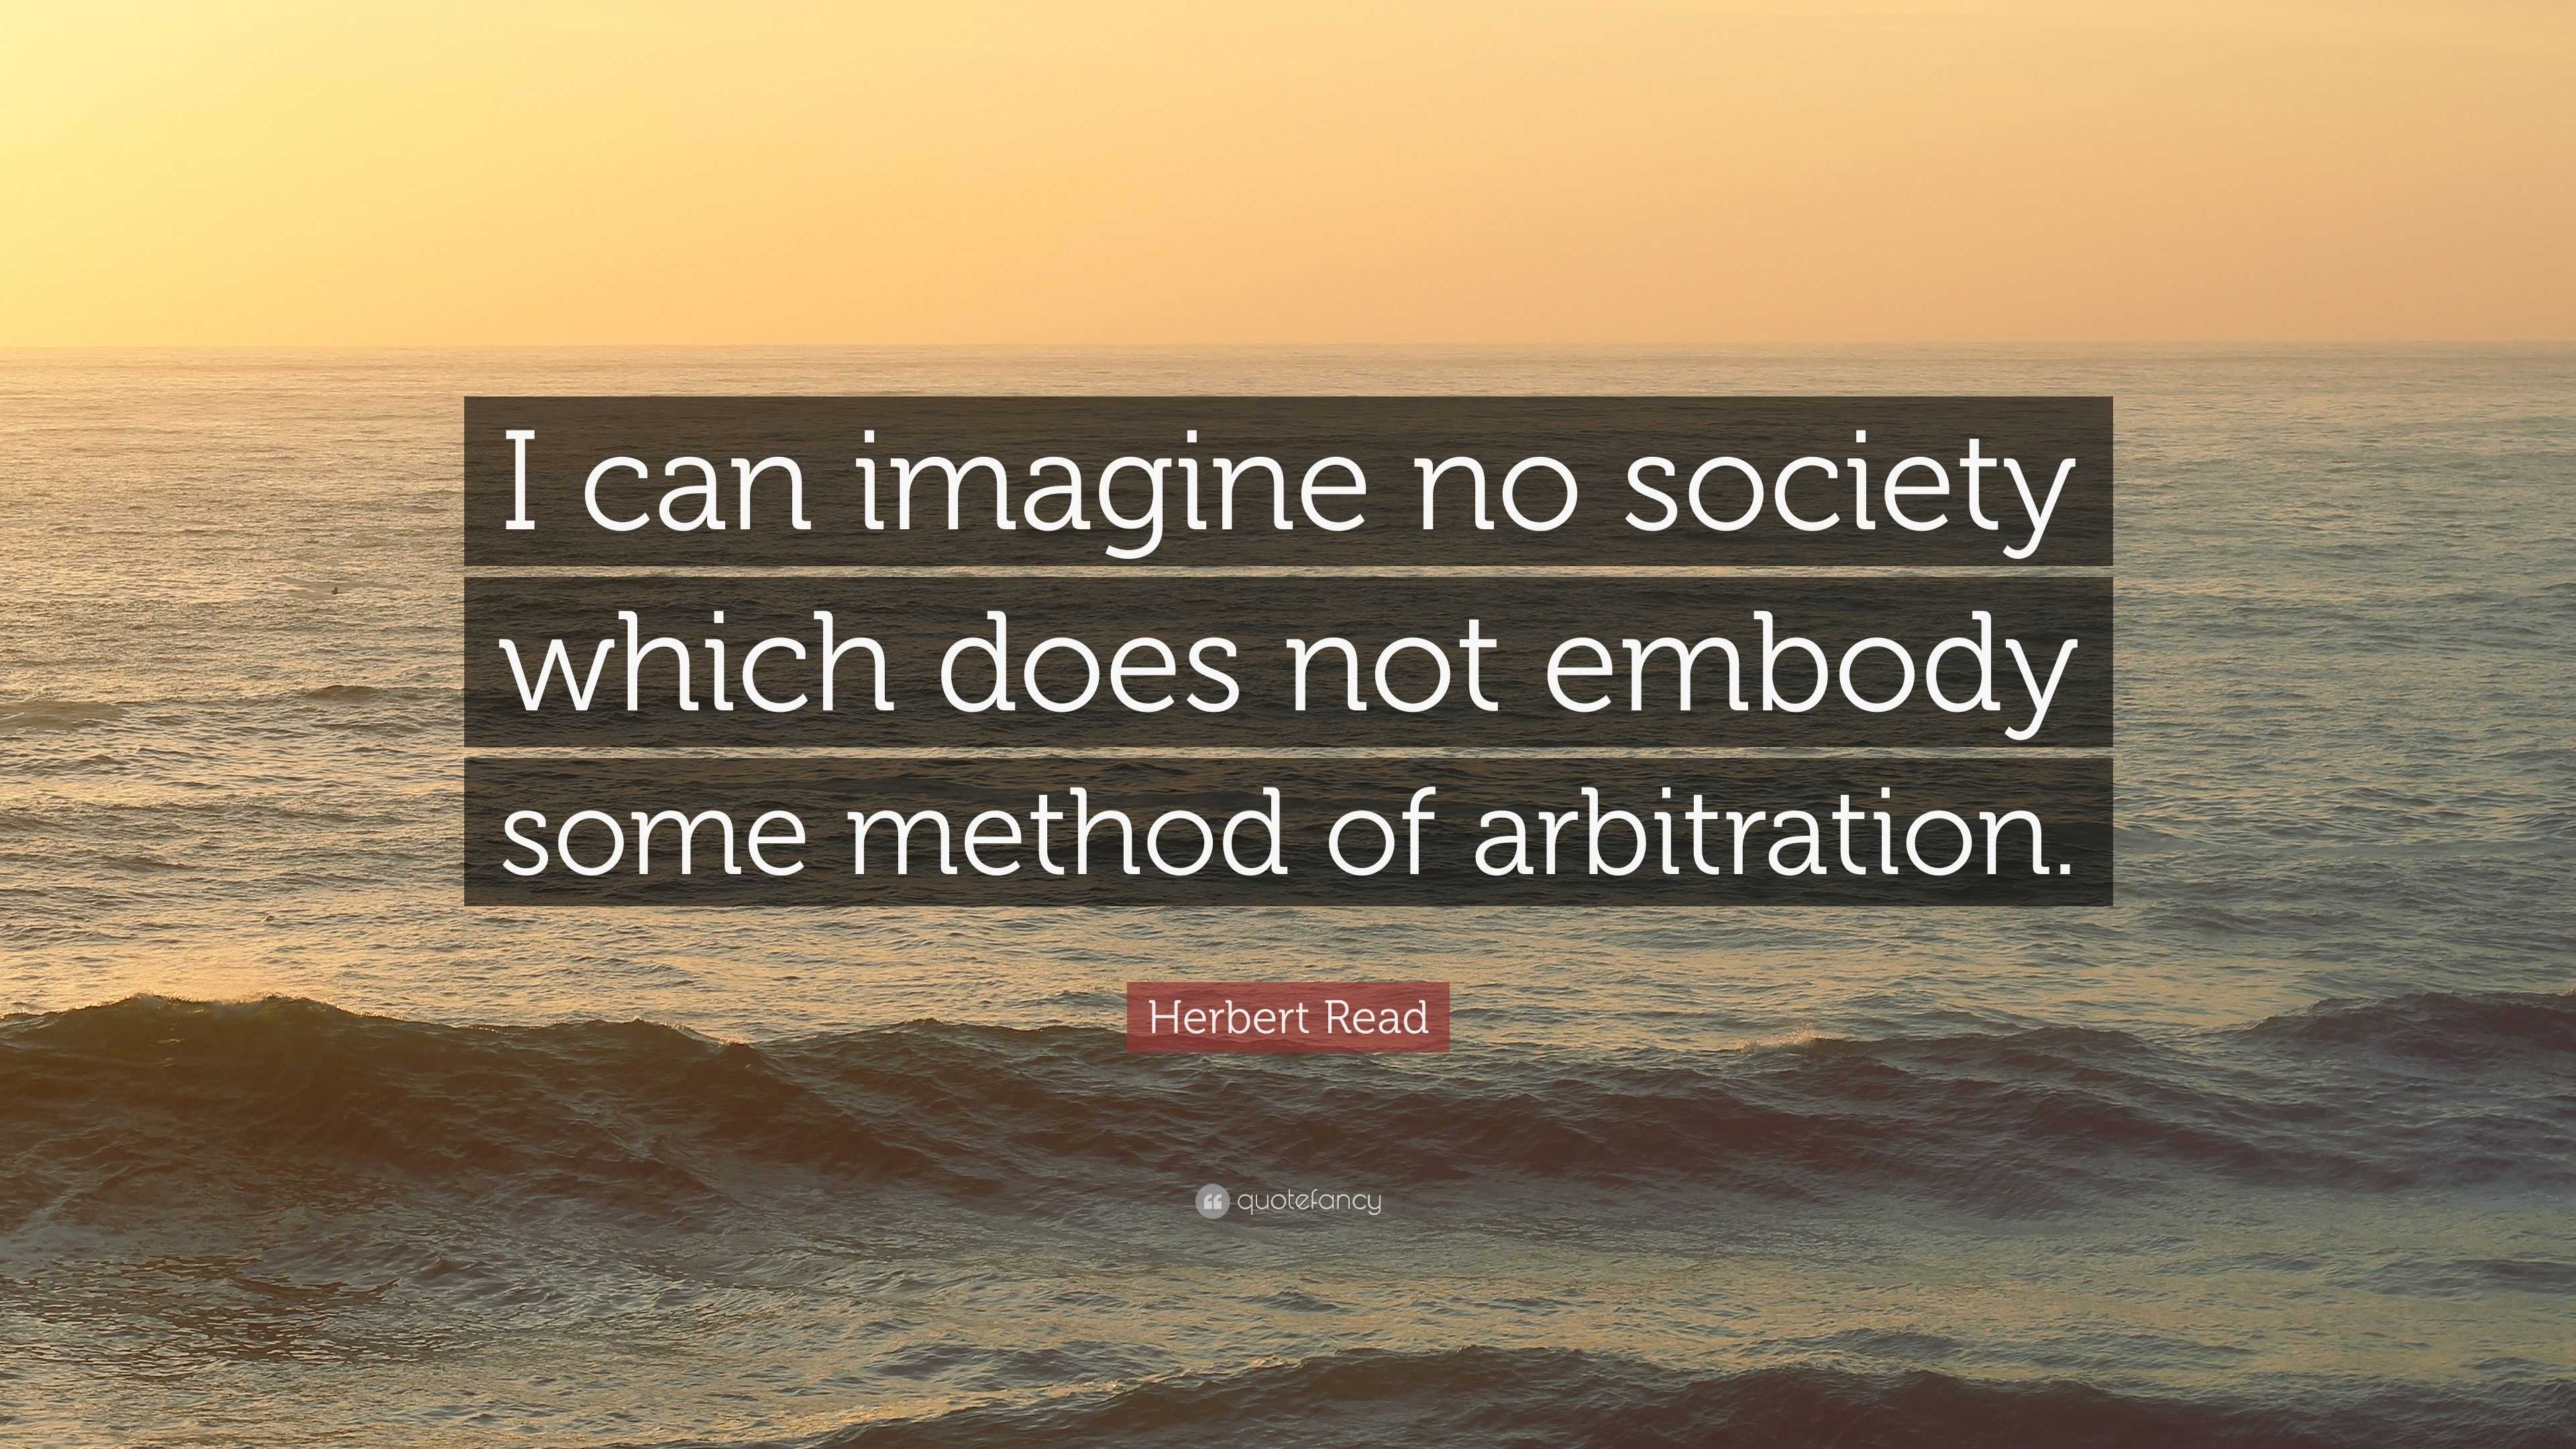 Herbert Read Quote: “I can imagine no society which does not embody ...